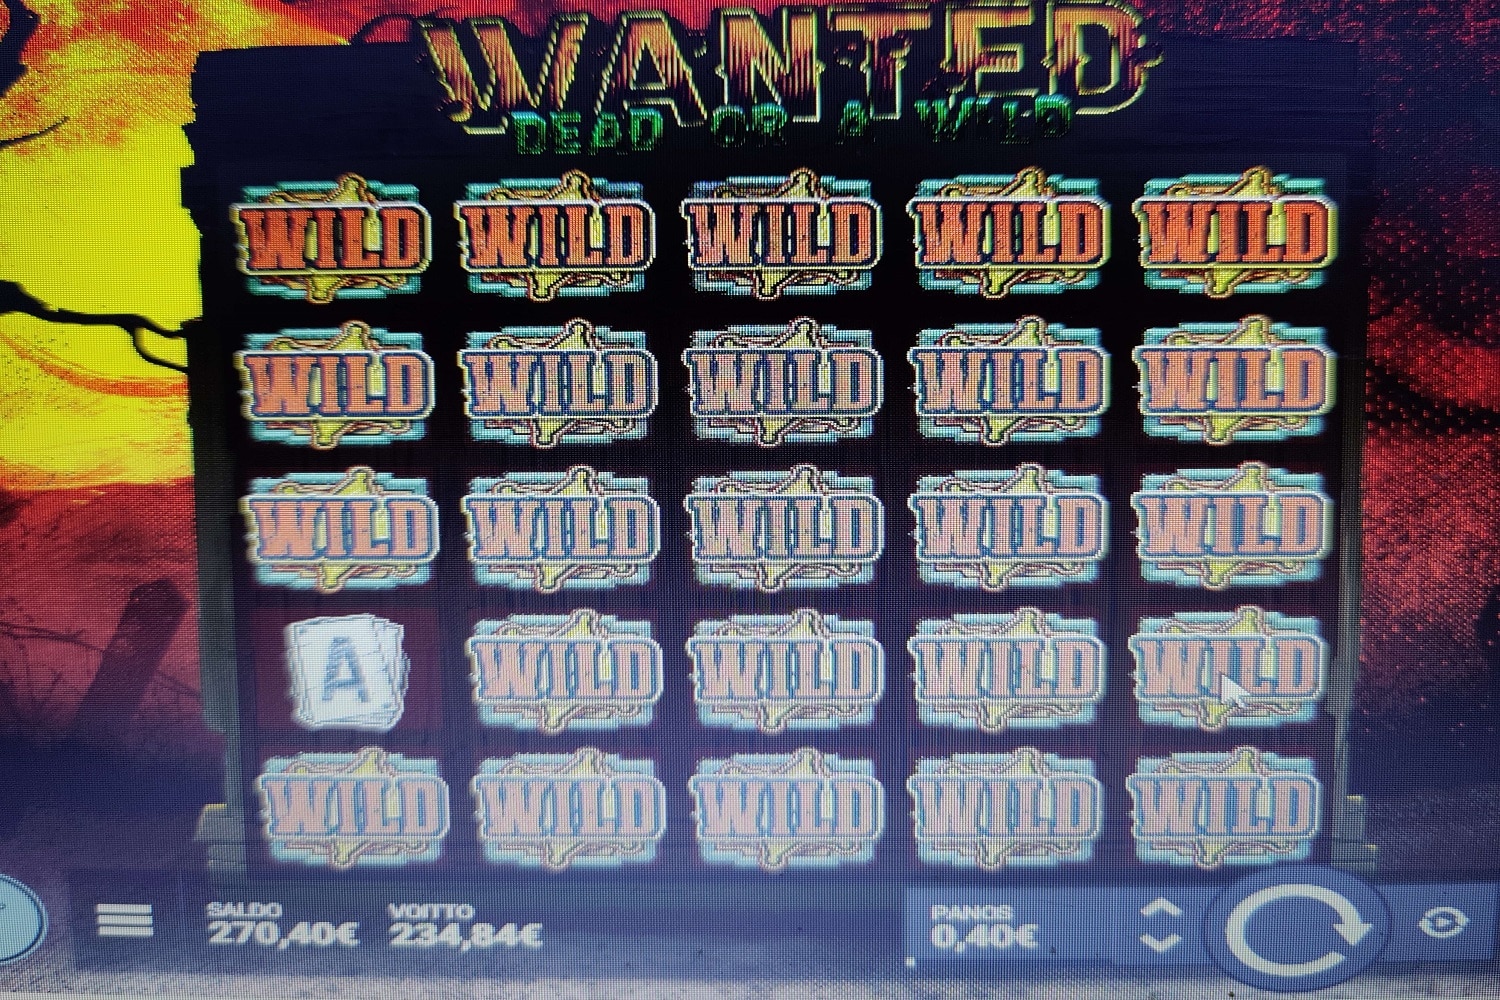 Wanted Dead or a Wild Casino win picture by Phenomfinland 234.84€ 1174.2x 1.11.2022 Spinz